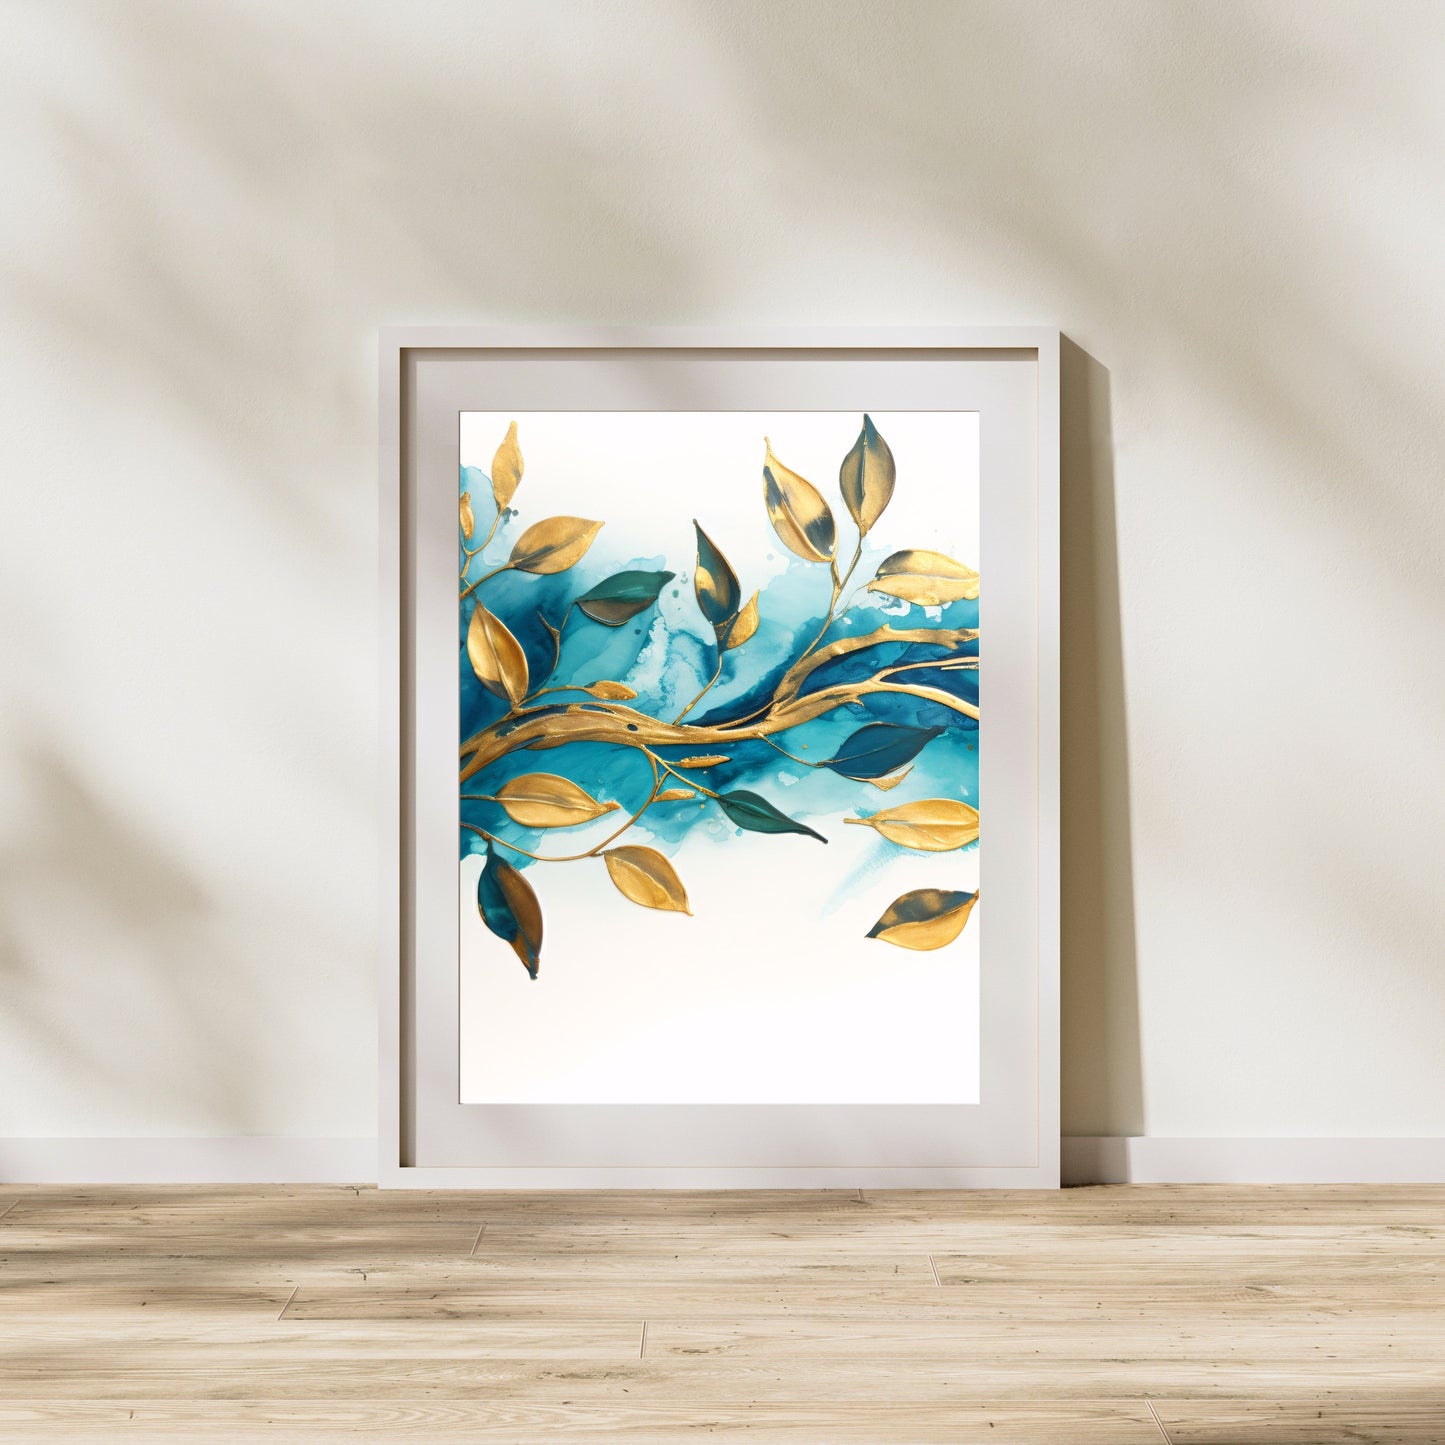 Petrol and Gold Wall Art Set of 3 Prints Abstract Petrol Design on White Background and Golden Leaves Living Room Decor Paper Poster Prints